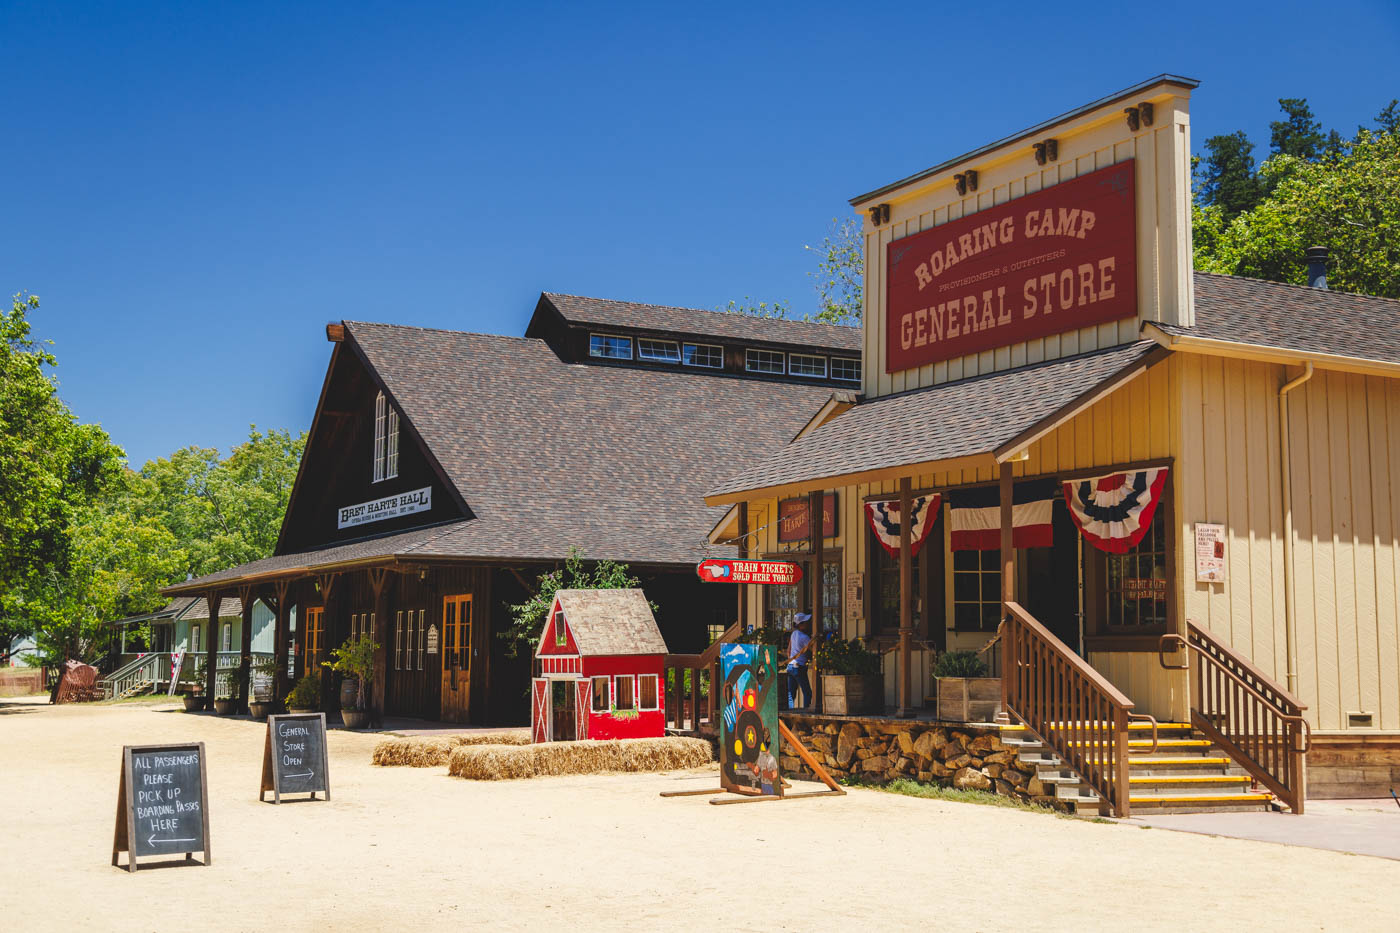 Old western looking general store in Roaring Camp Station town on a sunny day.